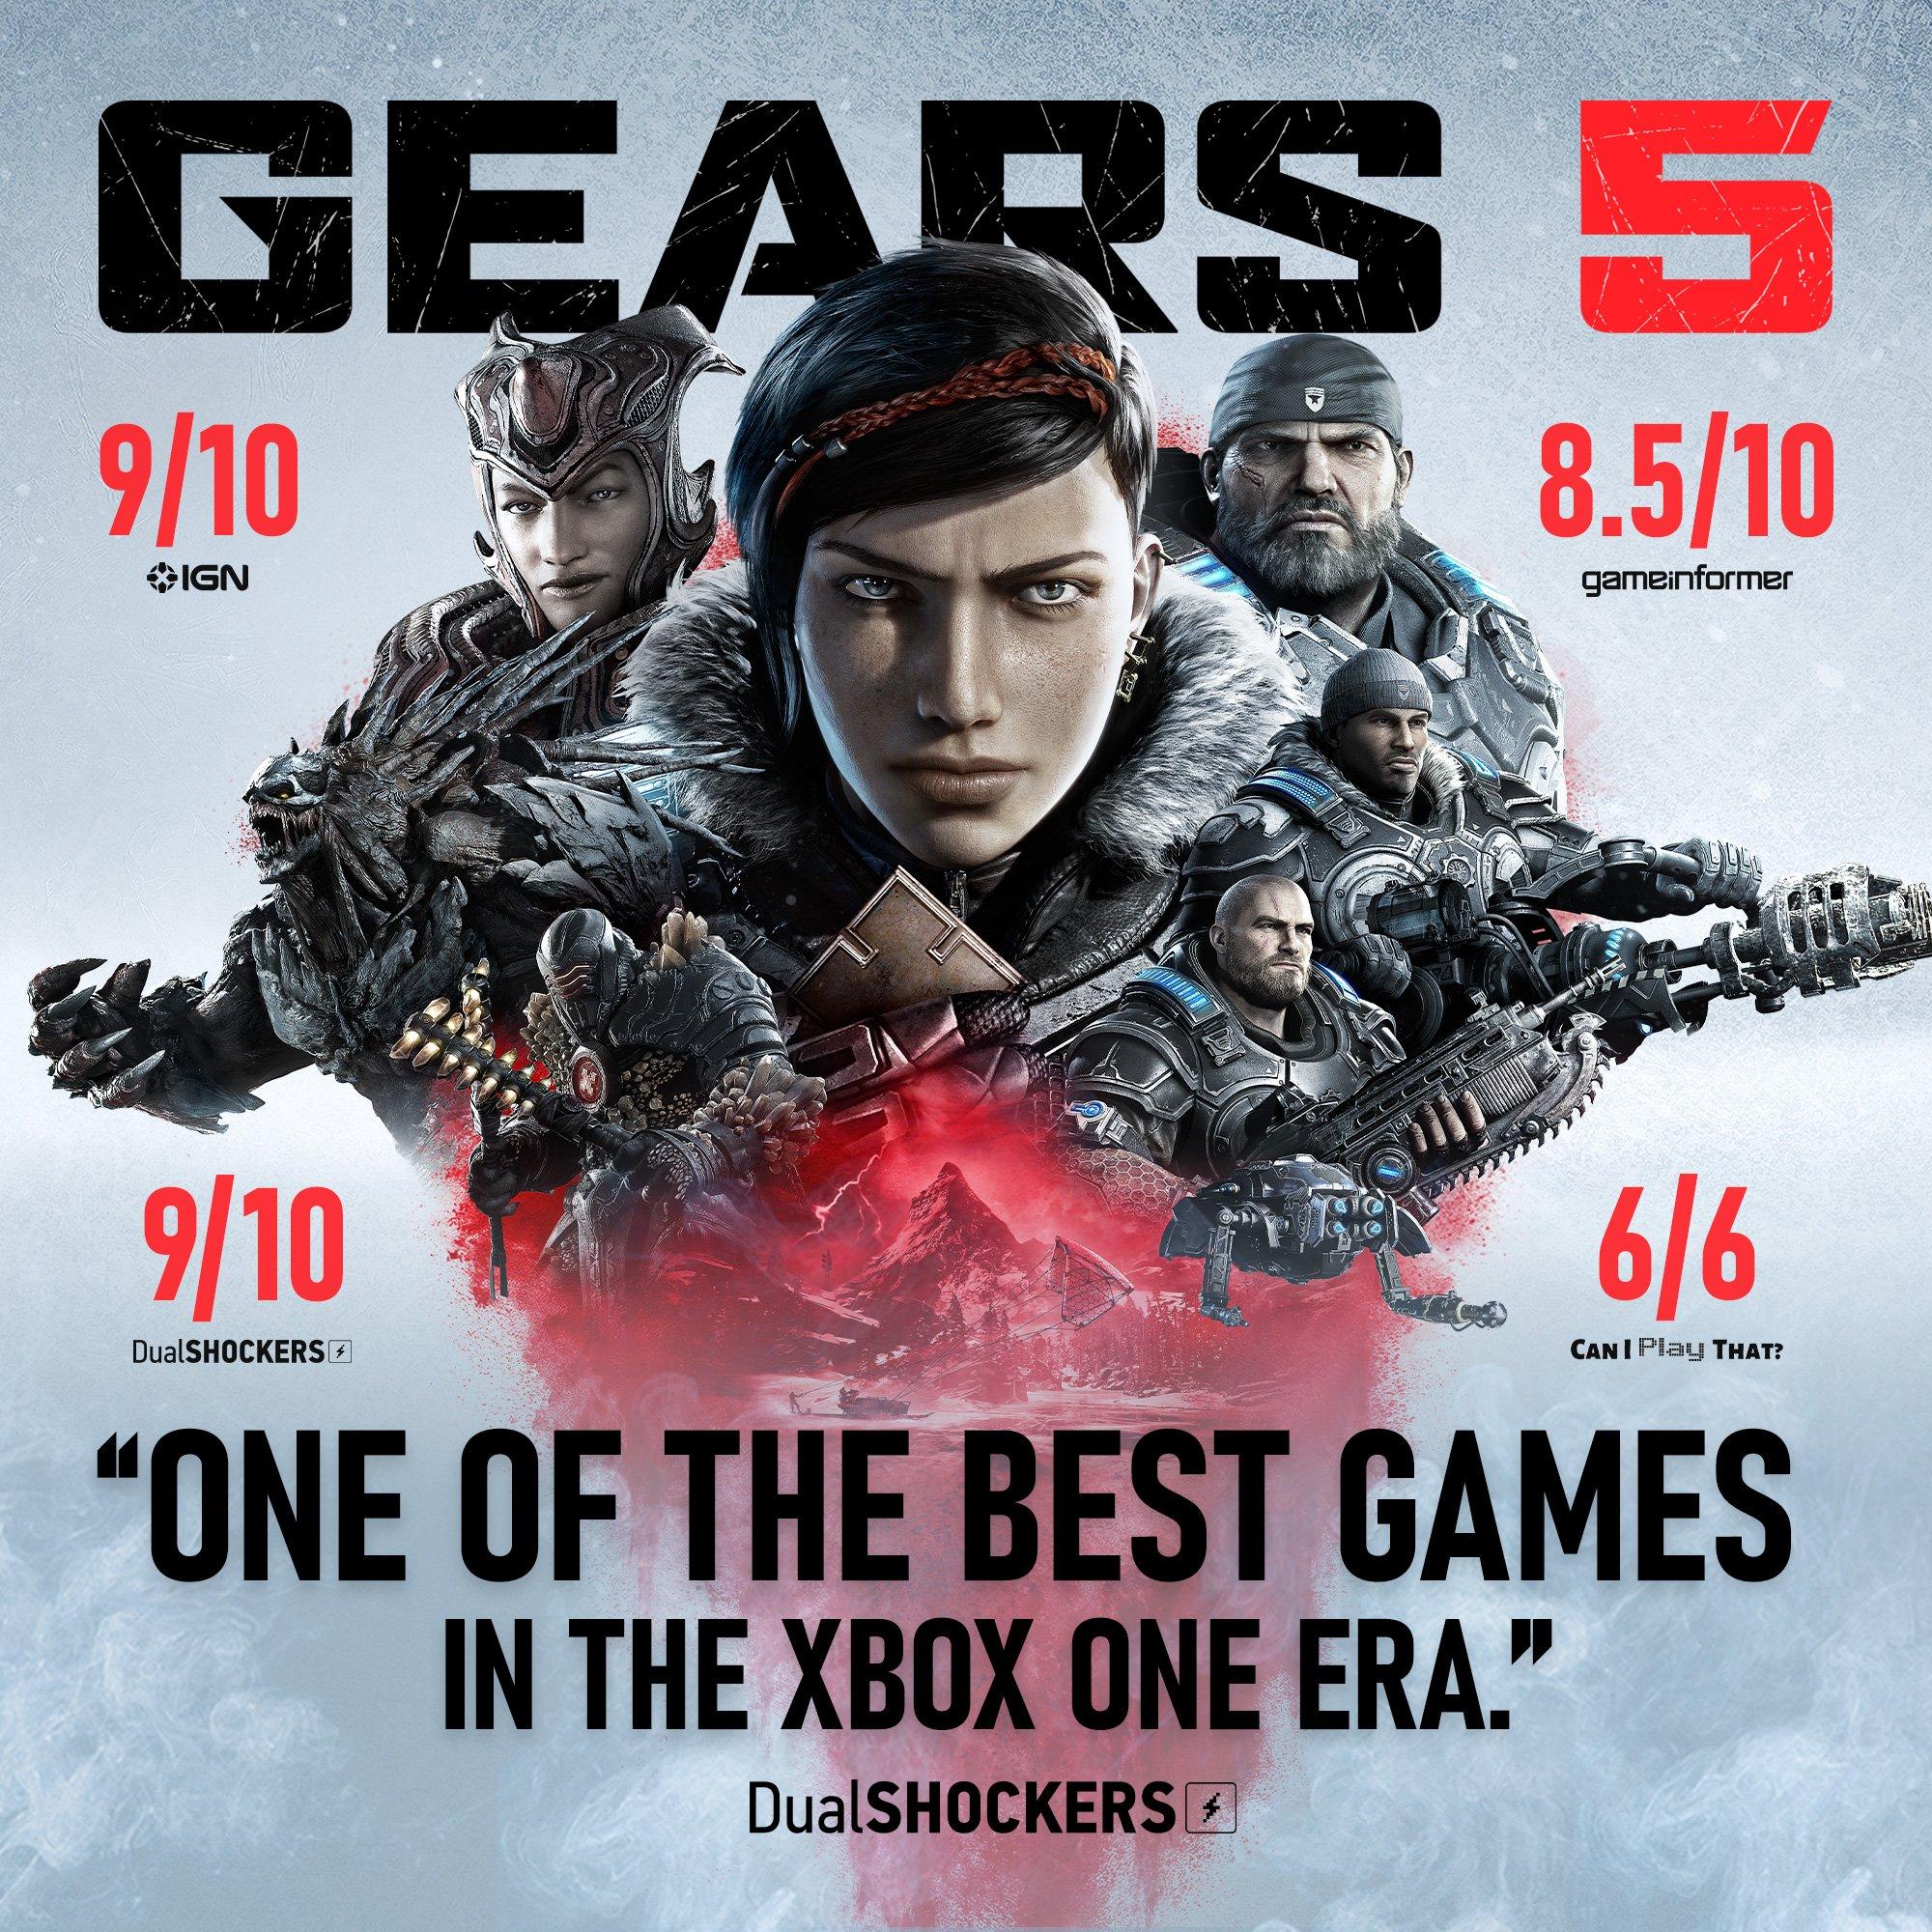 gears 5 price xbox one